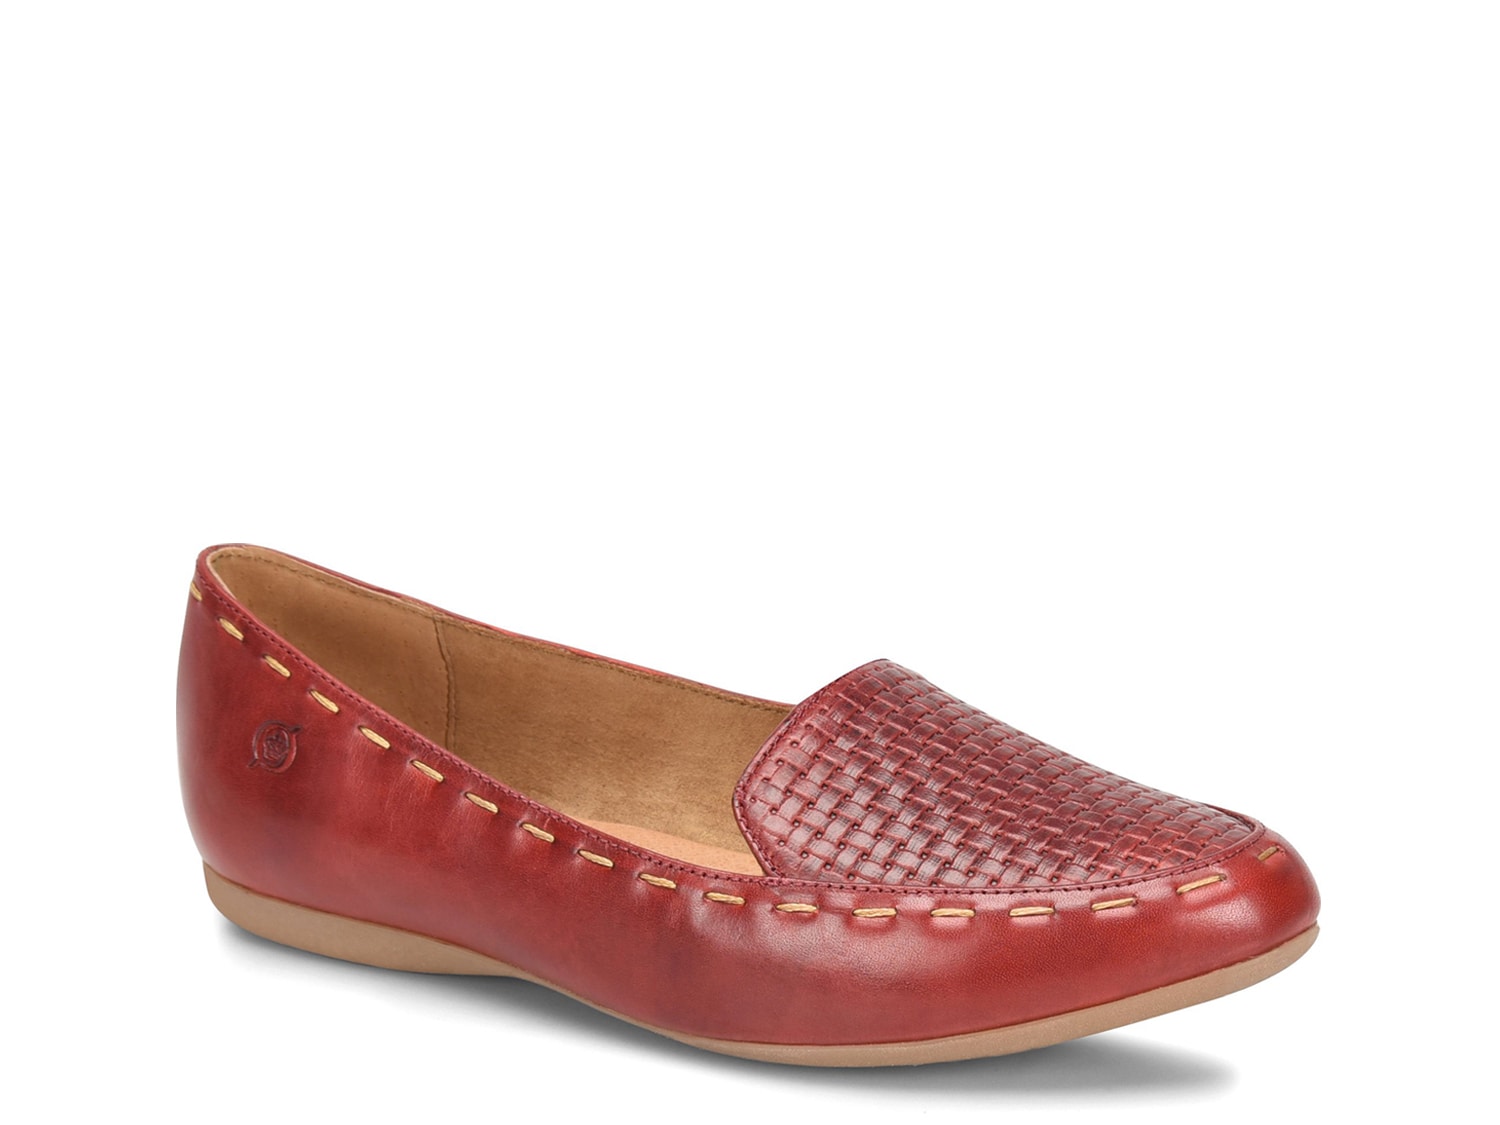 Born Maple Loafer Women's Shoes | DSW